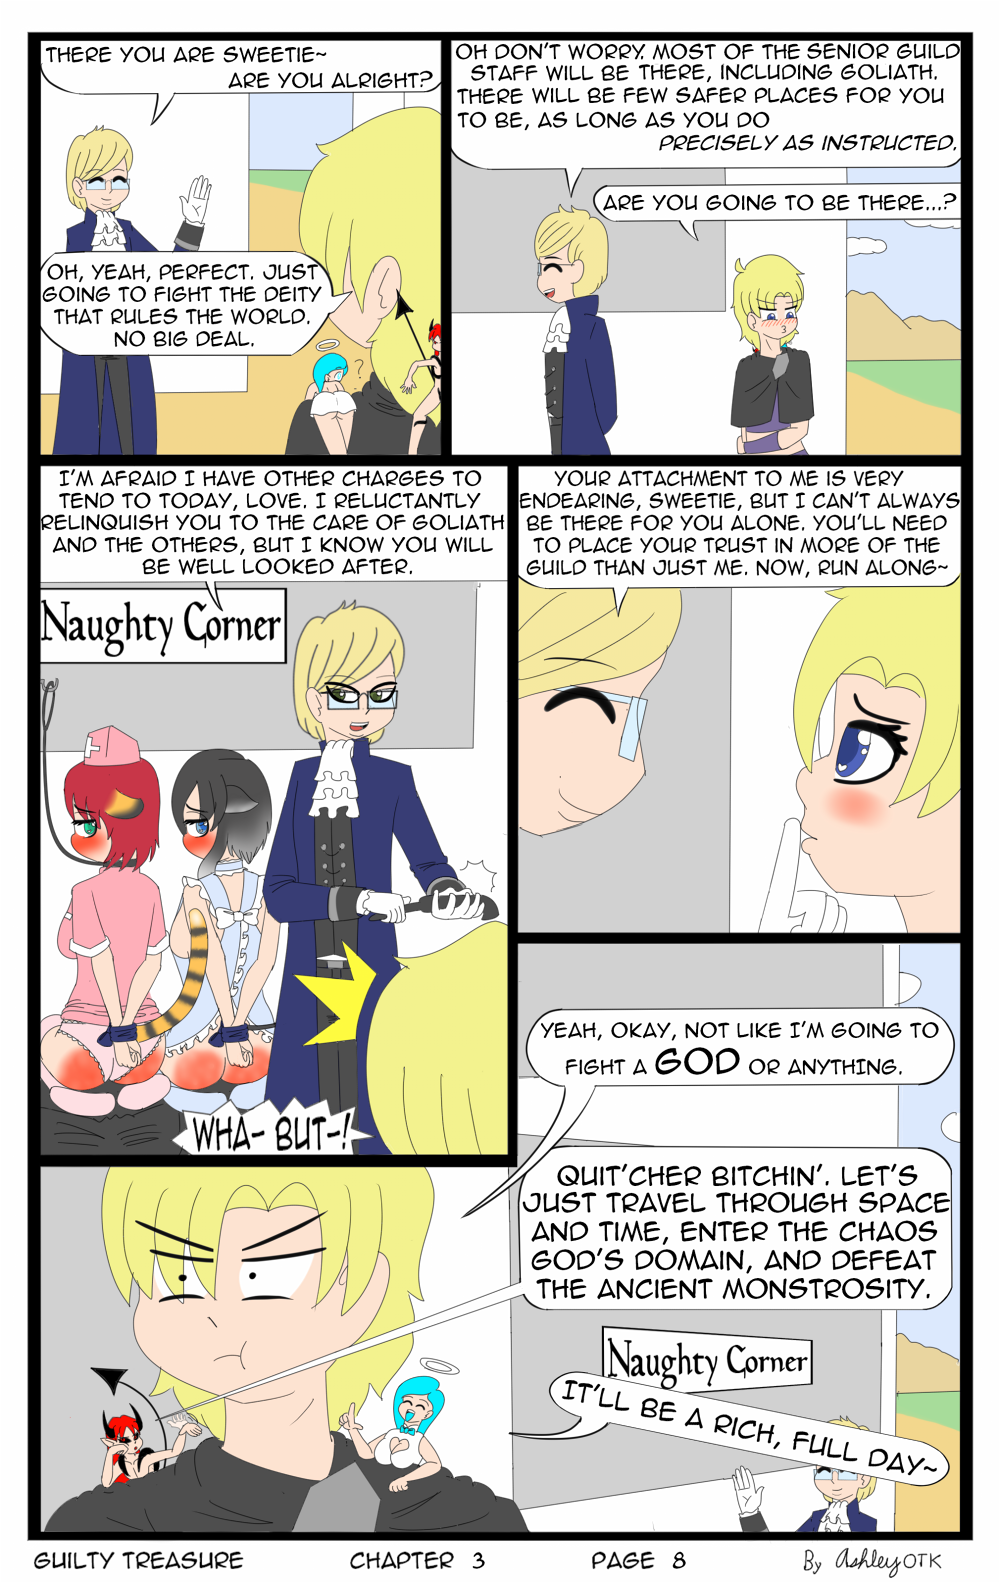 Guilty_Treasure__Guilty Treasure Chapter 3 Page 8 by AshleyOTK